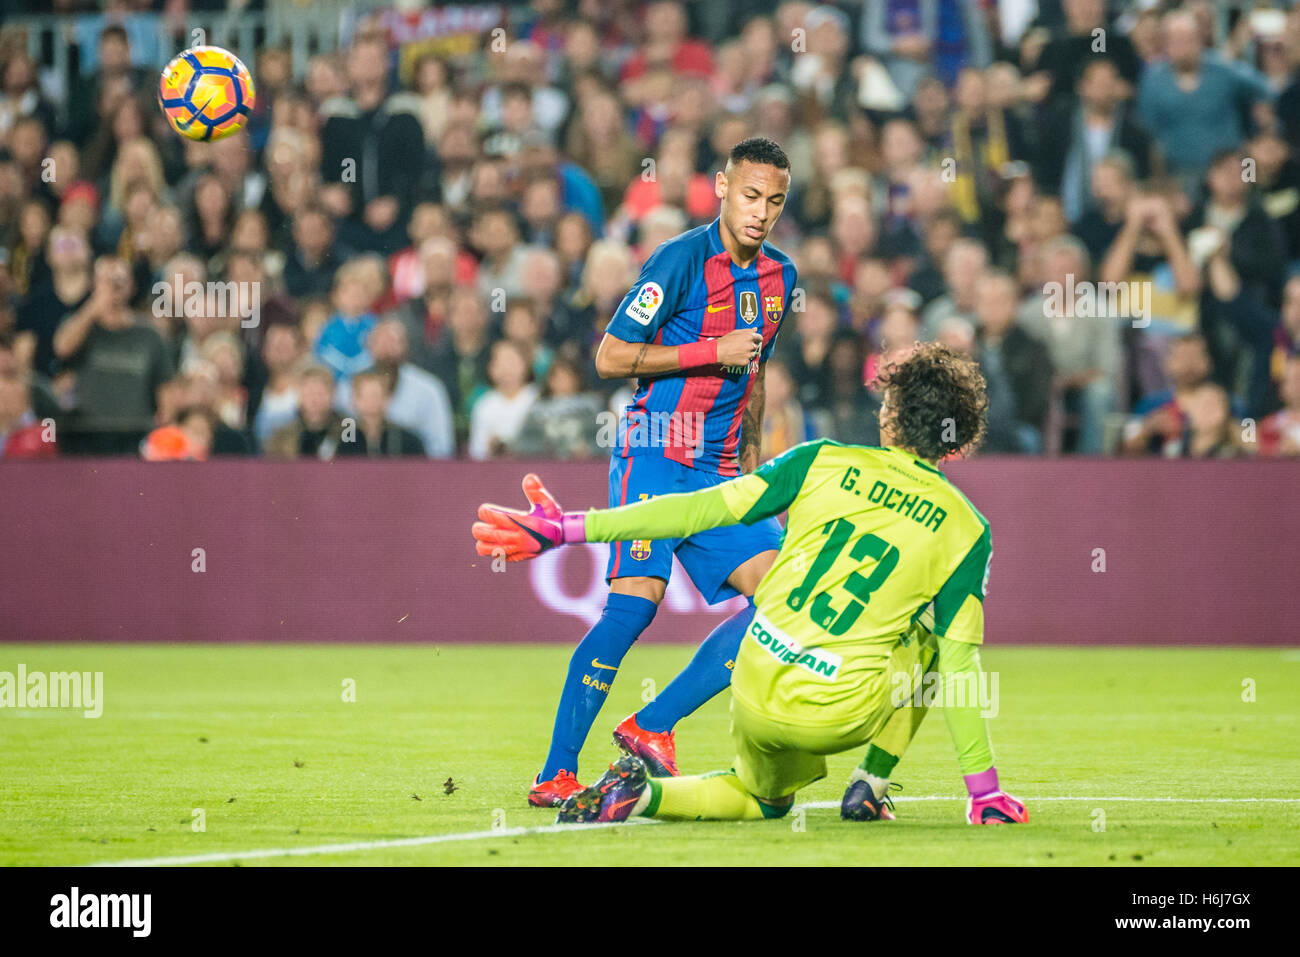 Barcelona, Catalonia, Spain. 29th Oct, 2016. FC Barcelona forward NEYMAR JR. misses a chance during the LaLiga match between FC Barcelona and Granada CF at the Camp Nou stadium in Barcelona © Matthias Oesterle/ZUMA Wire/Alamy Live News Stock Photo